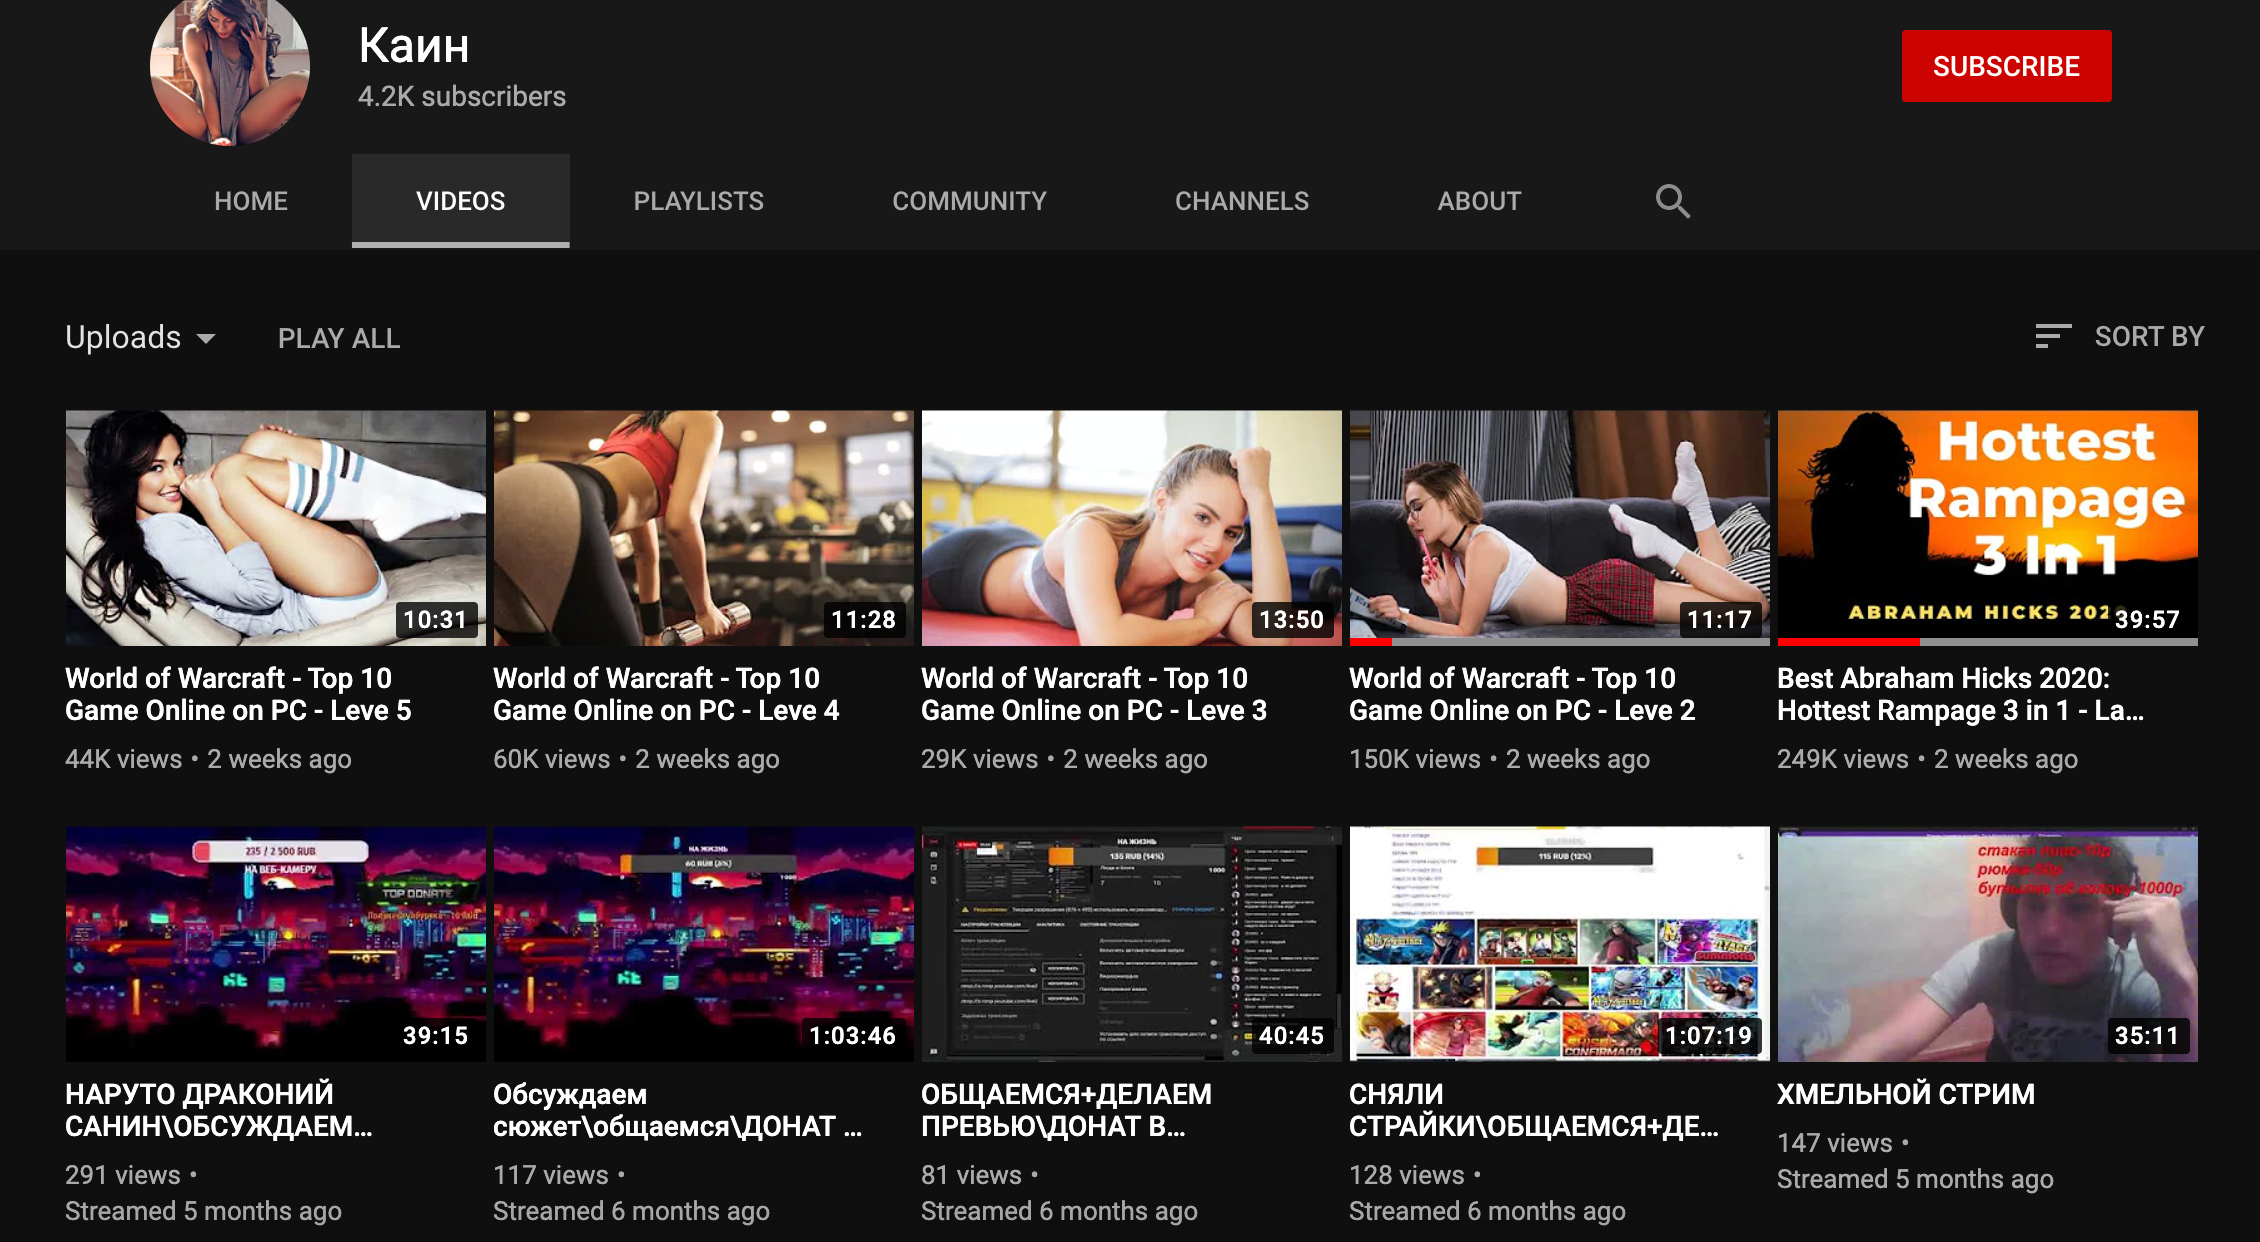 Porn Channels On Youtube